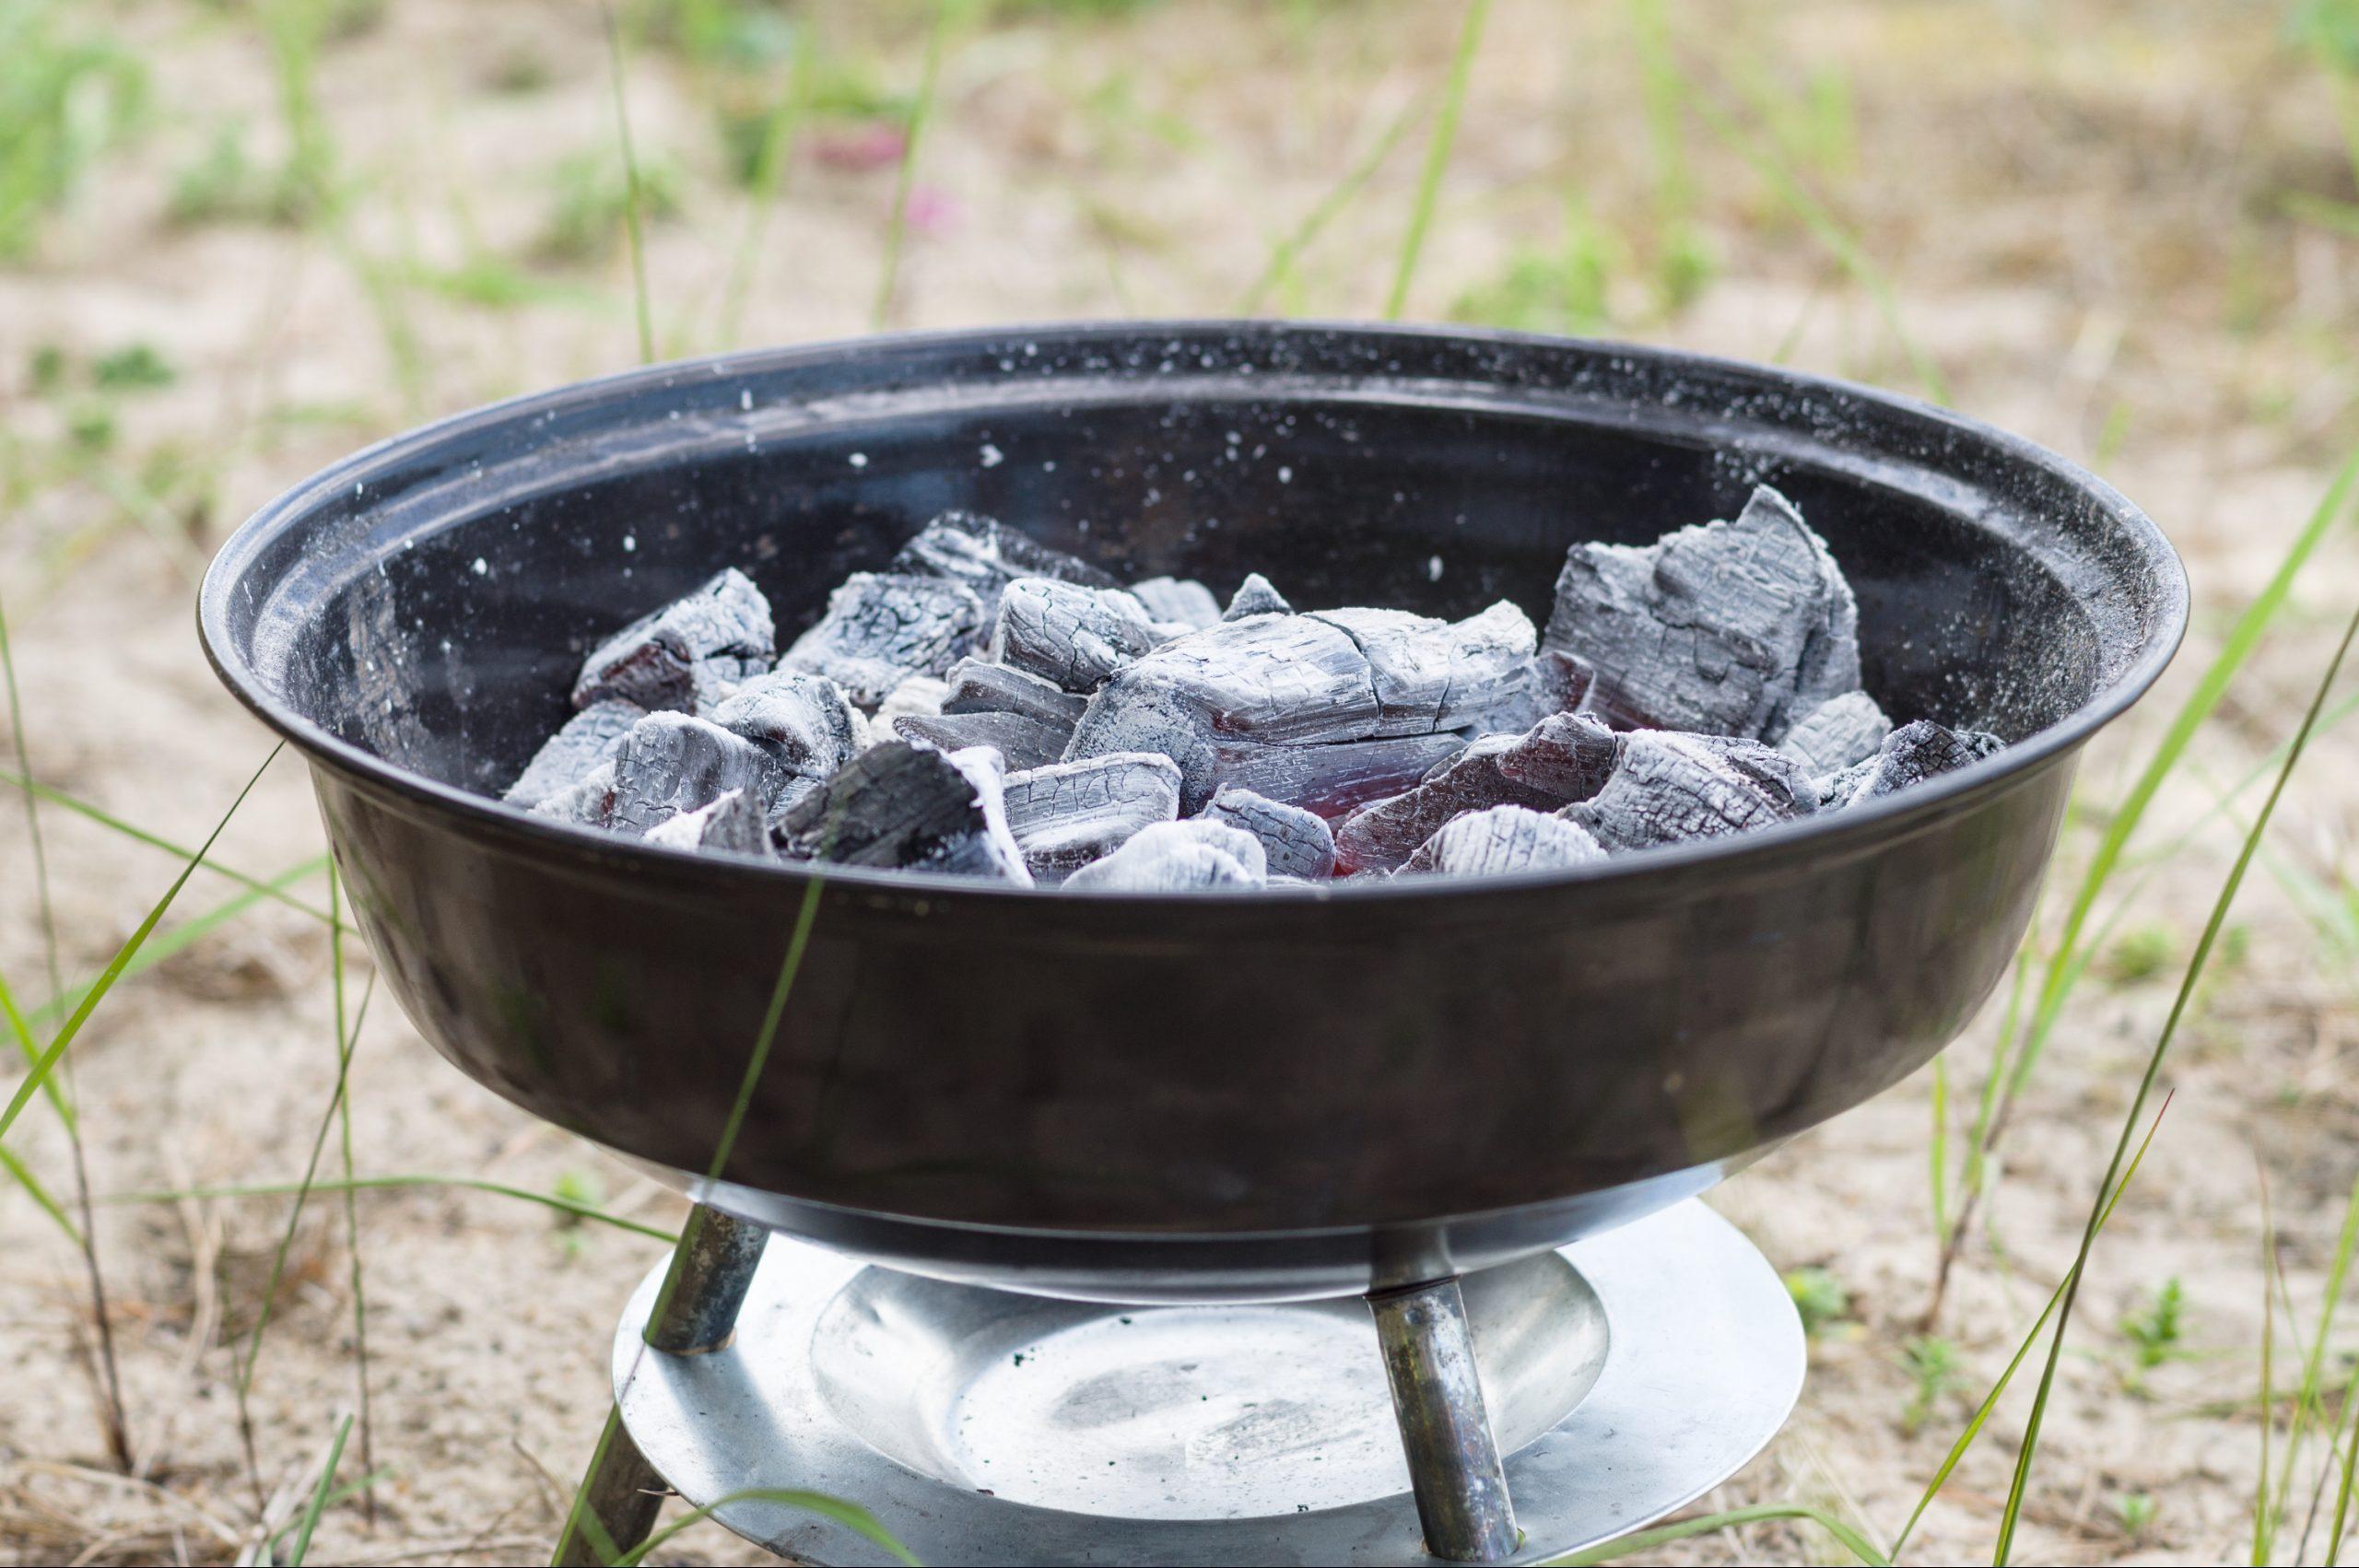 How To Put Out a Charcoal Grill Safely